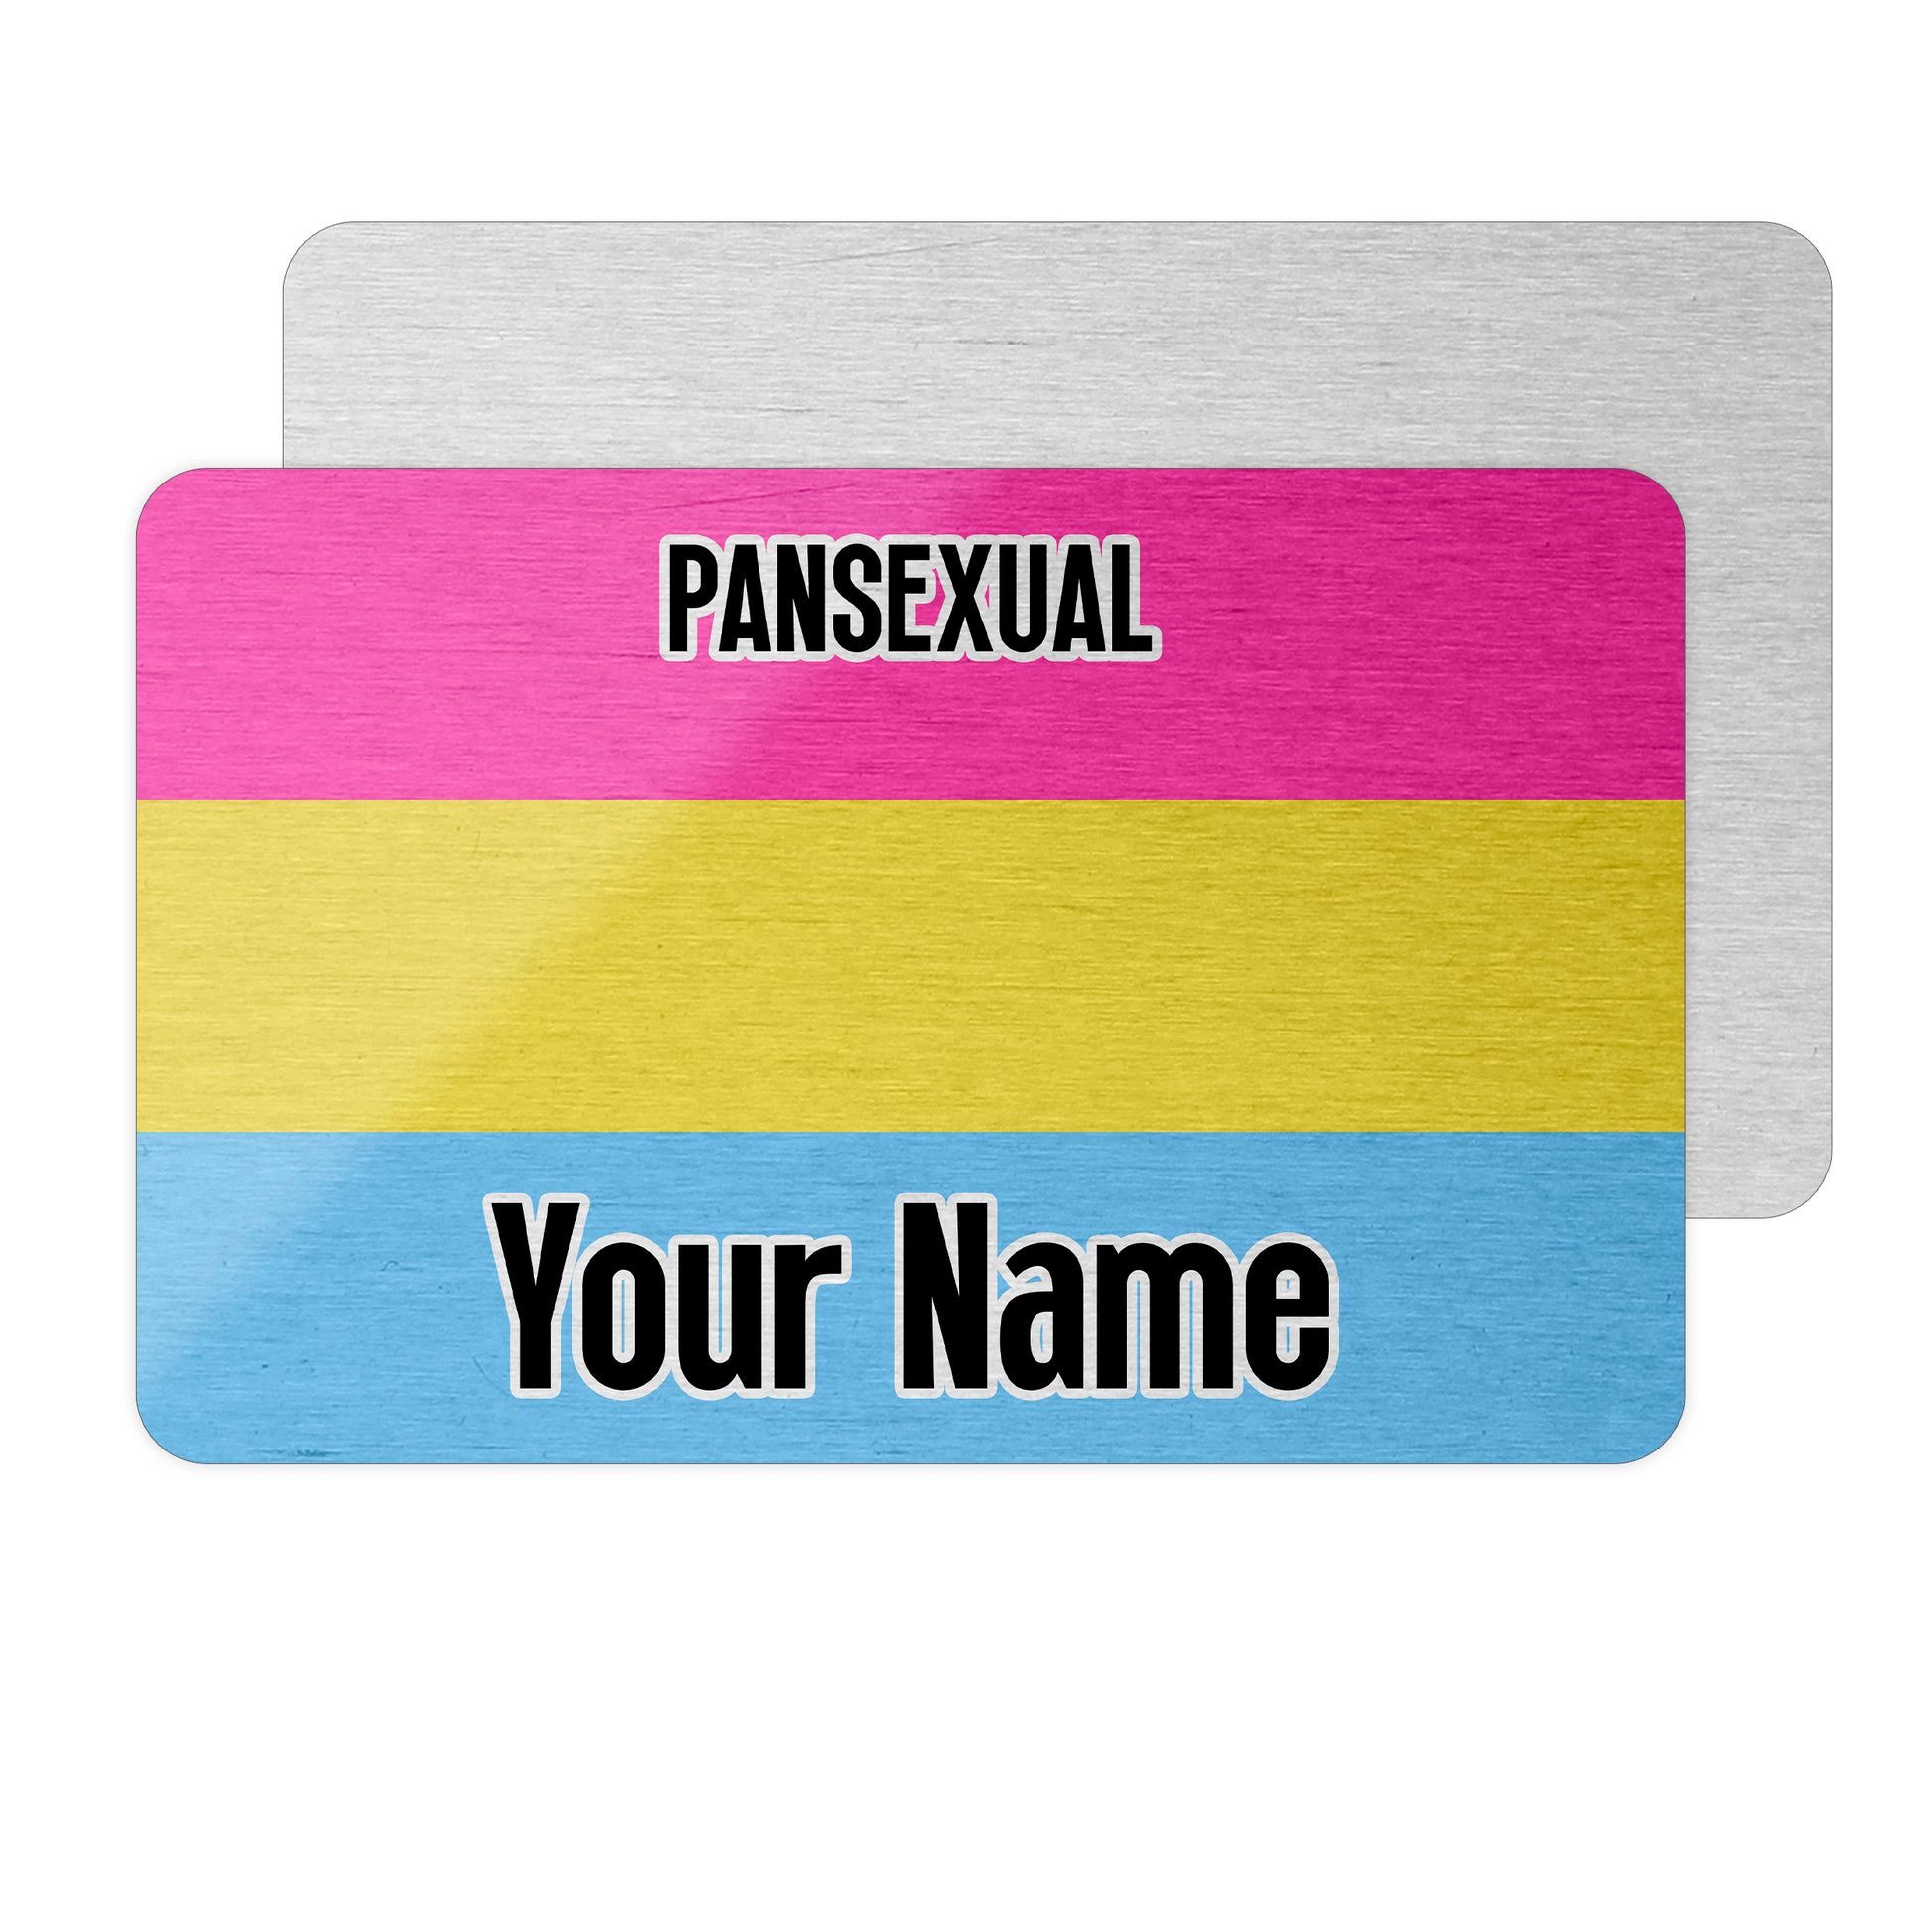 Aluminium wallet card personalised with your name and the pansexual pride flag